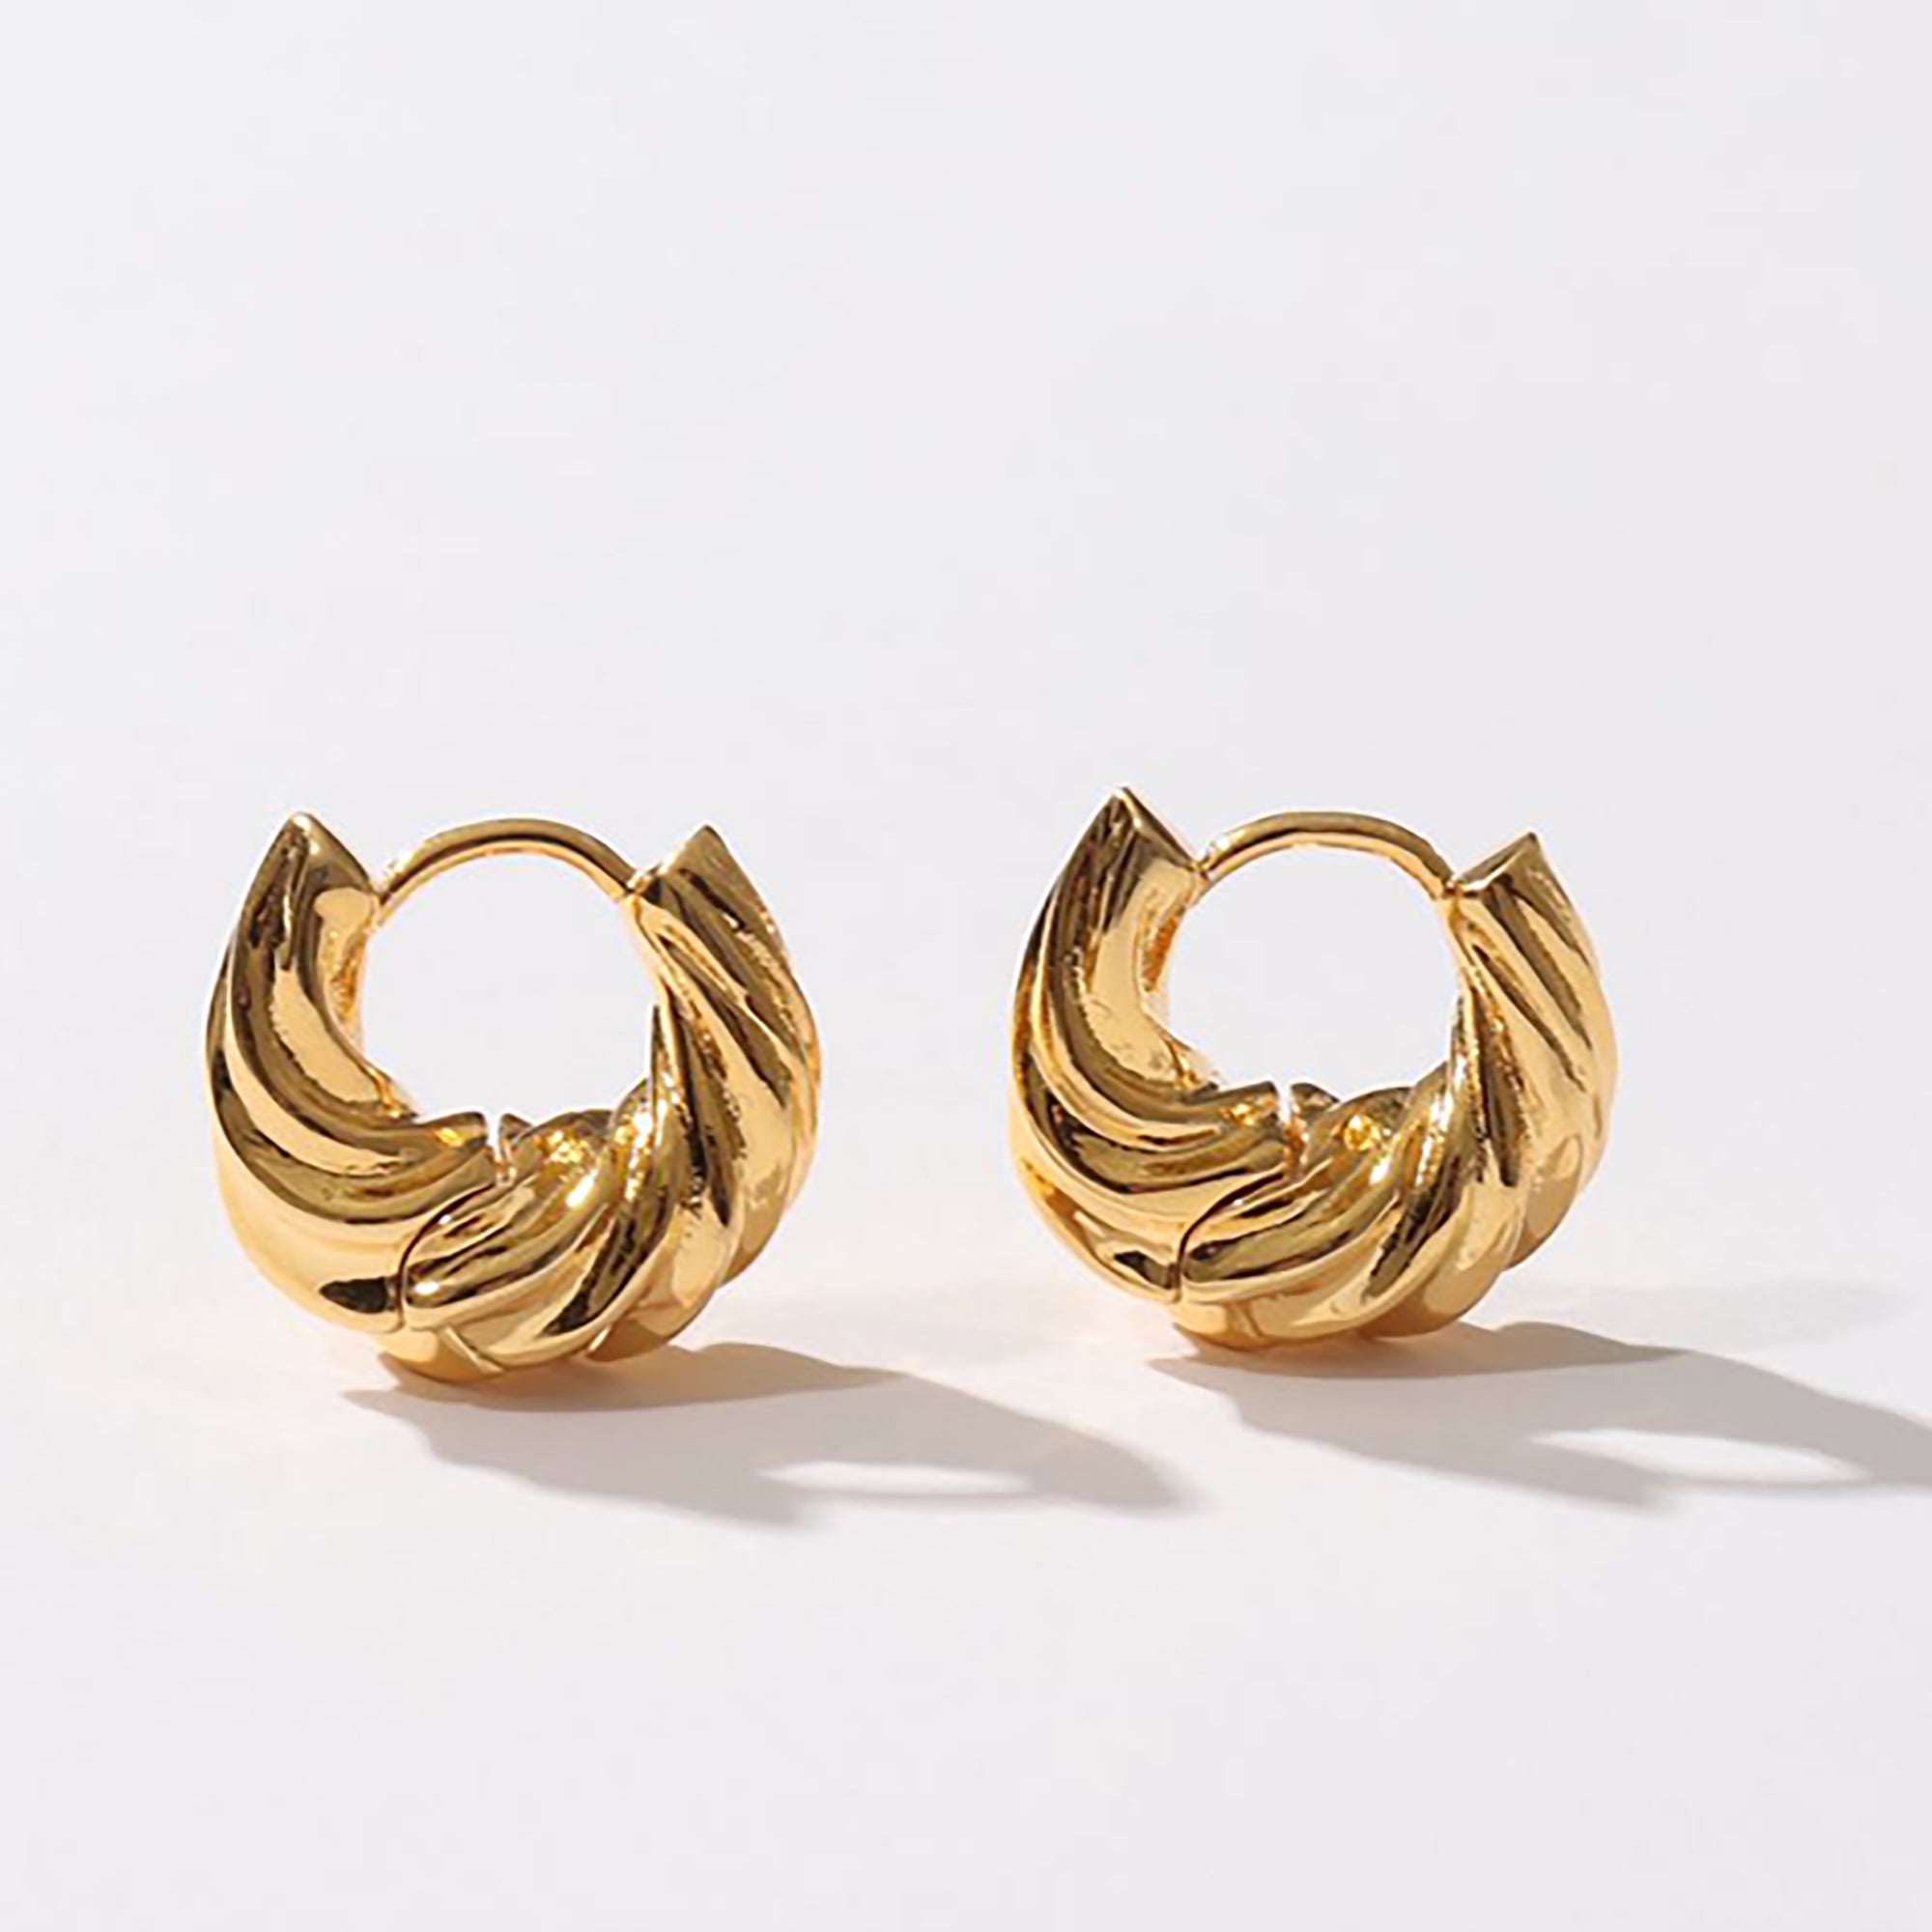 Gold Plated Hoop Earrings Gift wedding influencer styling KOL / Youtuber / Celebrity / Fashion Icon